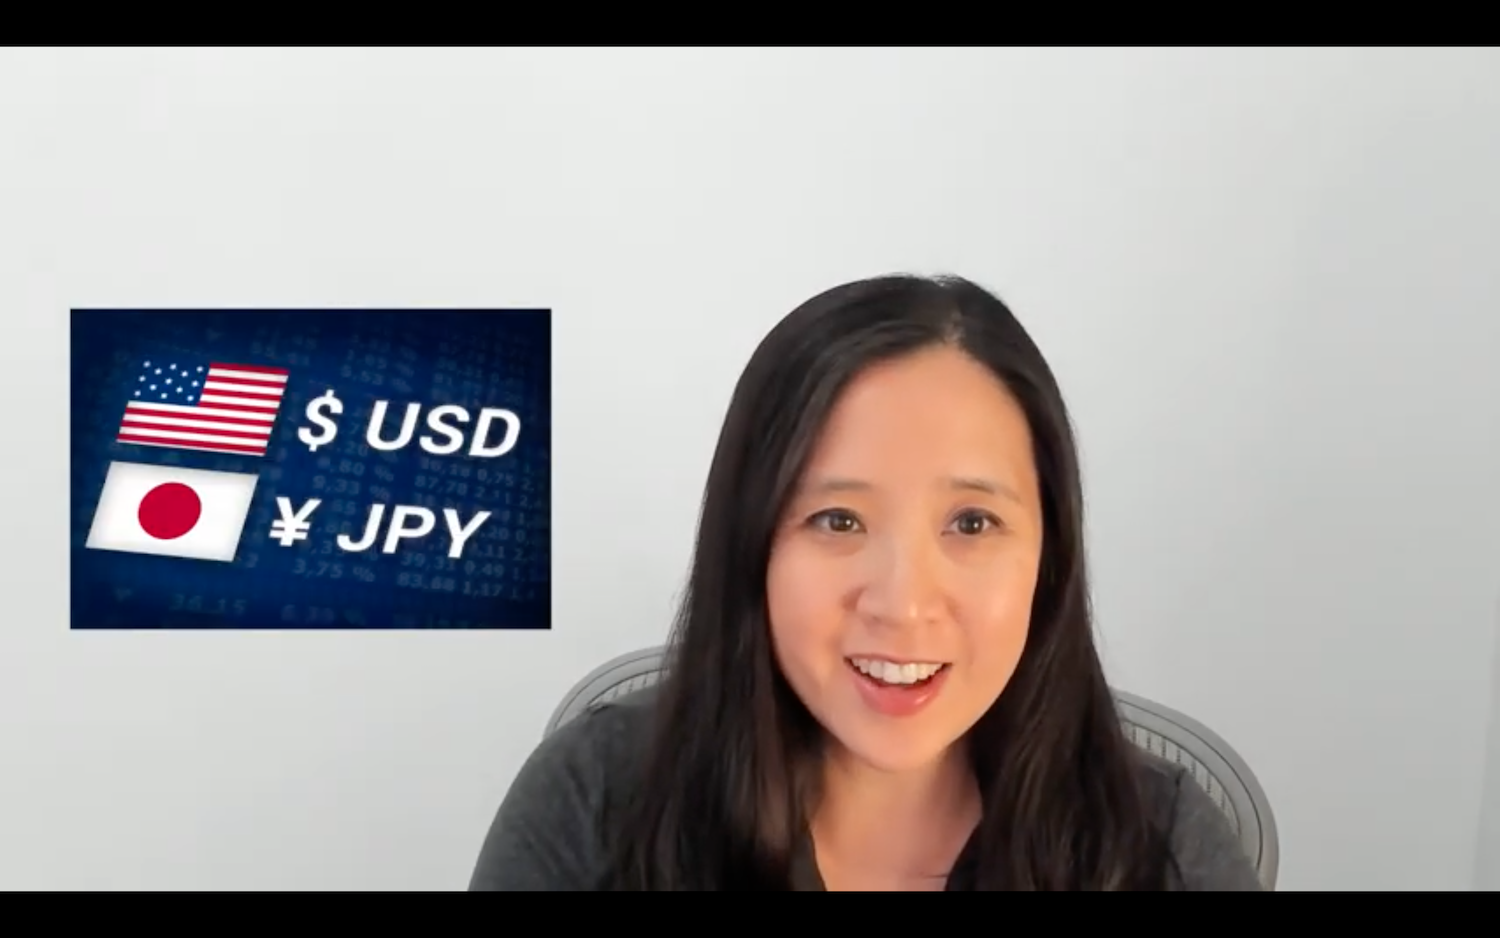 Meo-giao-dich-USDJPY-cua-Kathy-Lien-TraderViet1.png